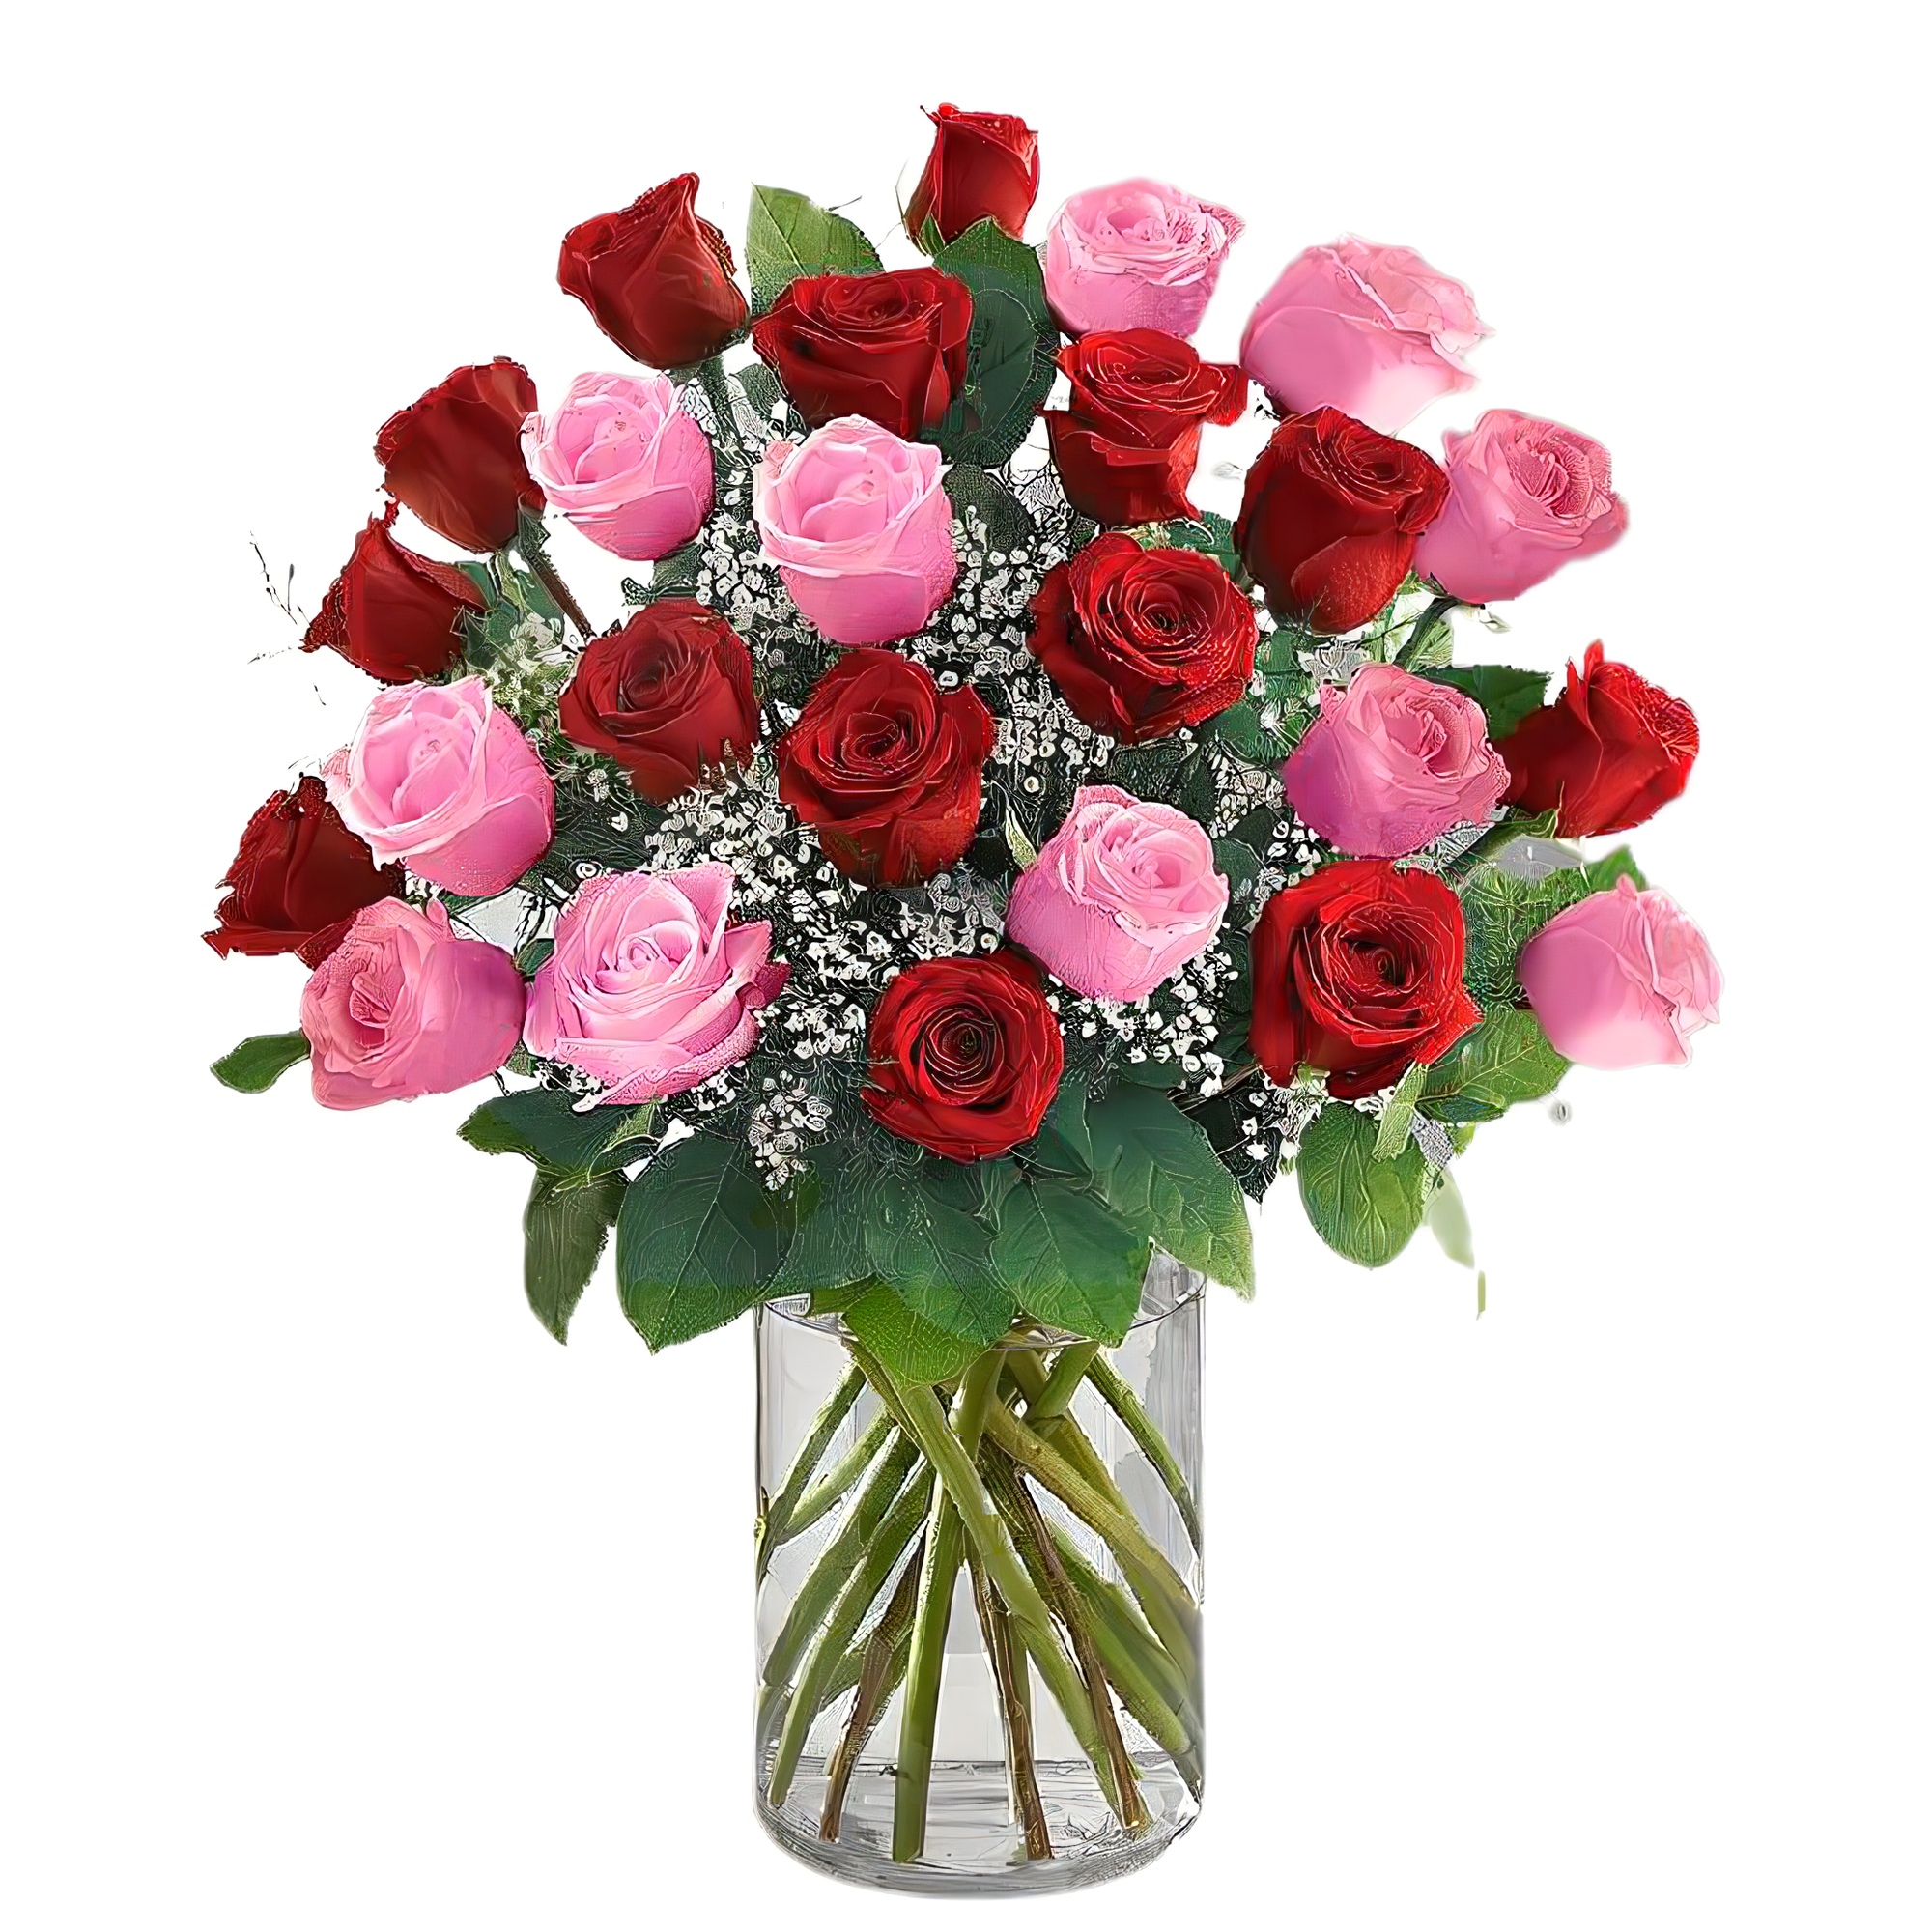 Queens Flower Delivery - Long Stem Pink & Red Roses